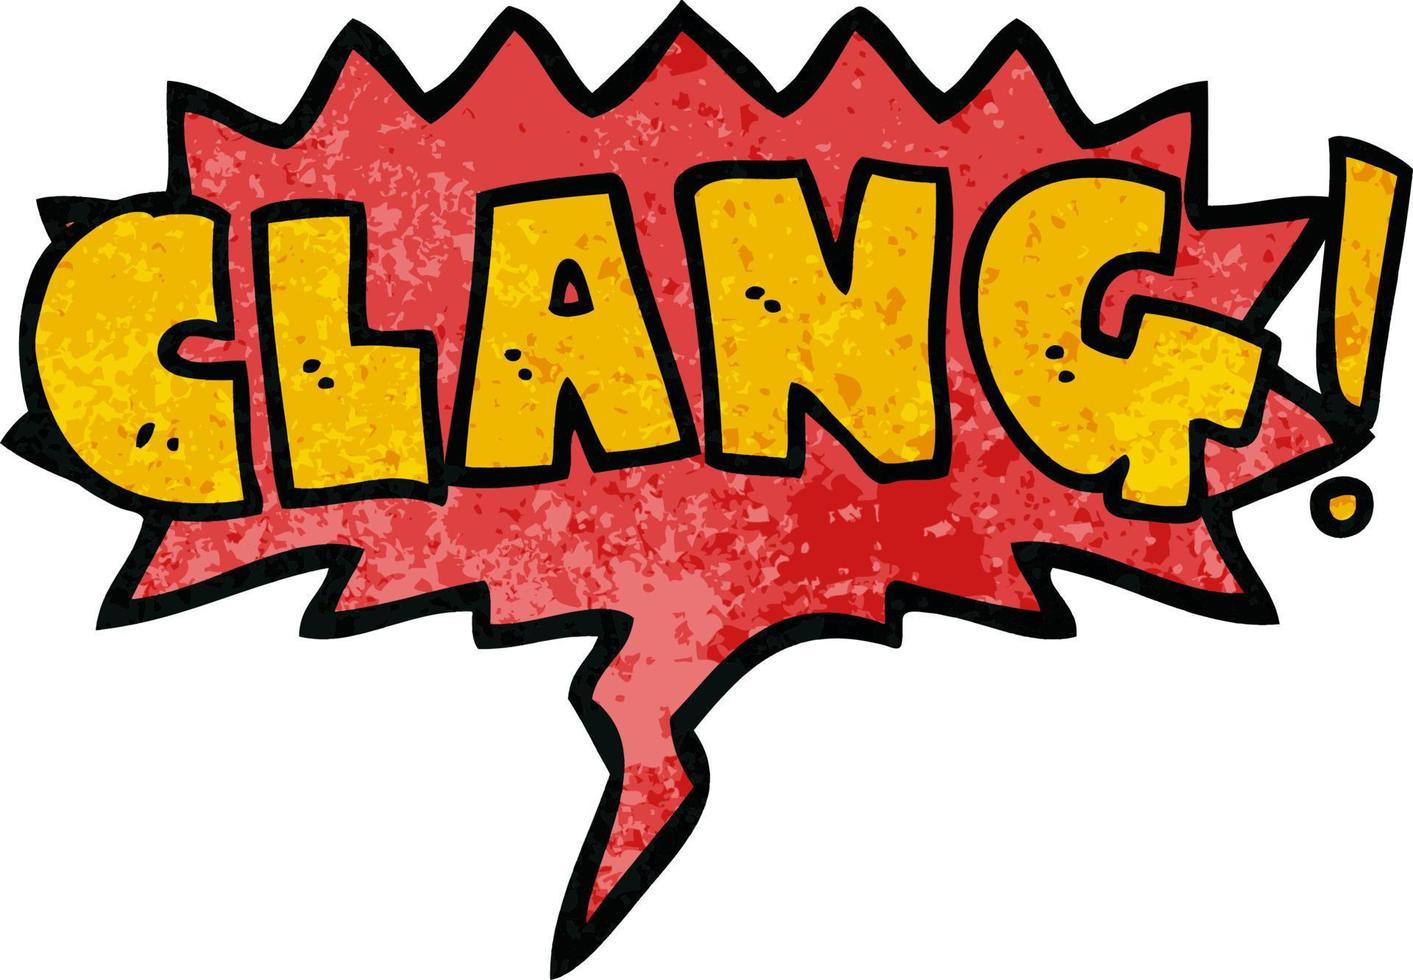 cartoon word clang and speech bubble in retro texture style vector